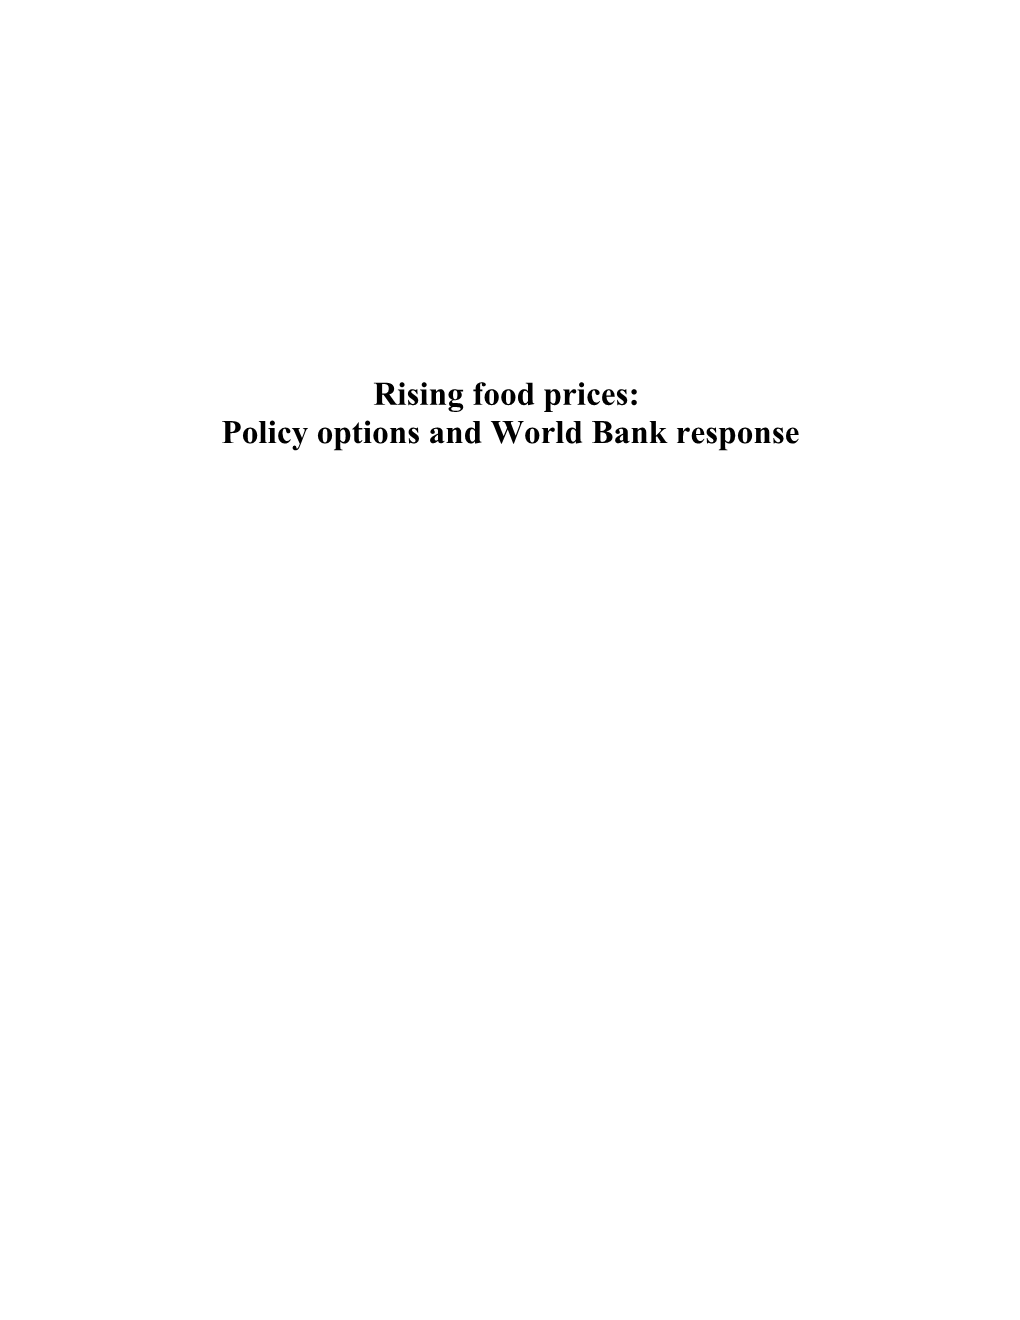 Rising Food Prices: Implications, Policy Options And Bank Response: Key Messages